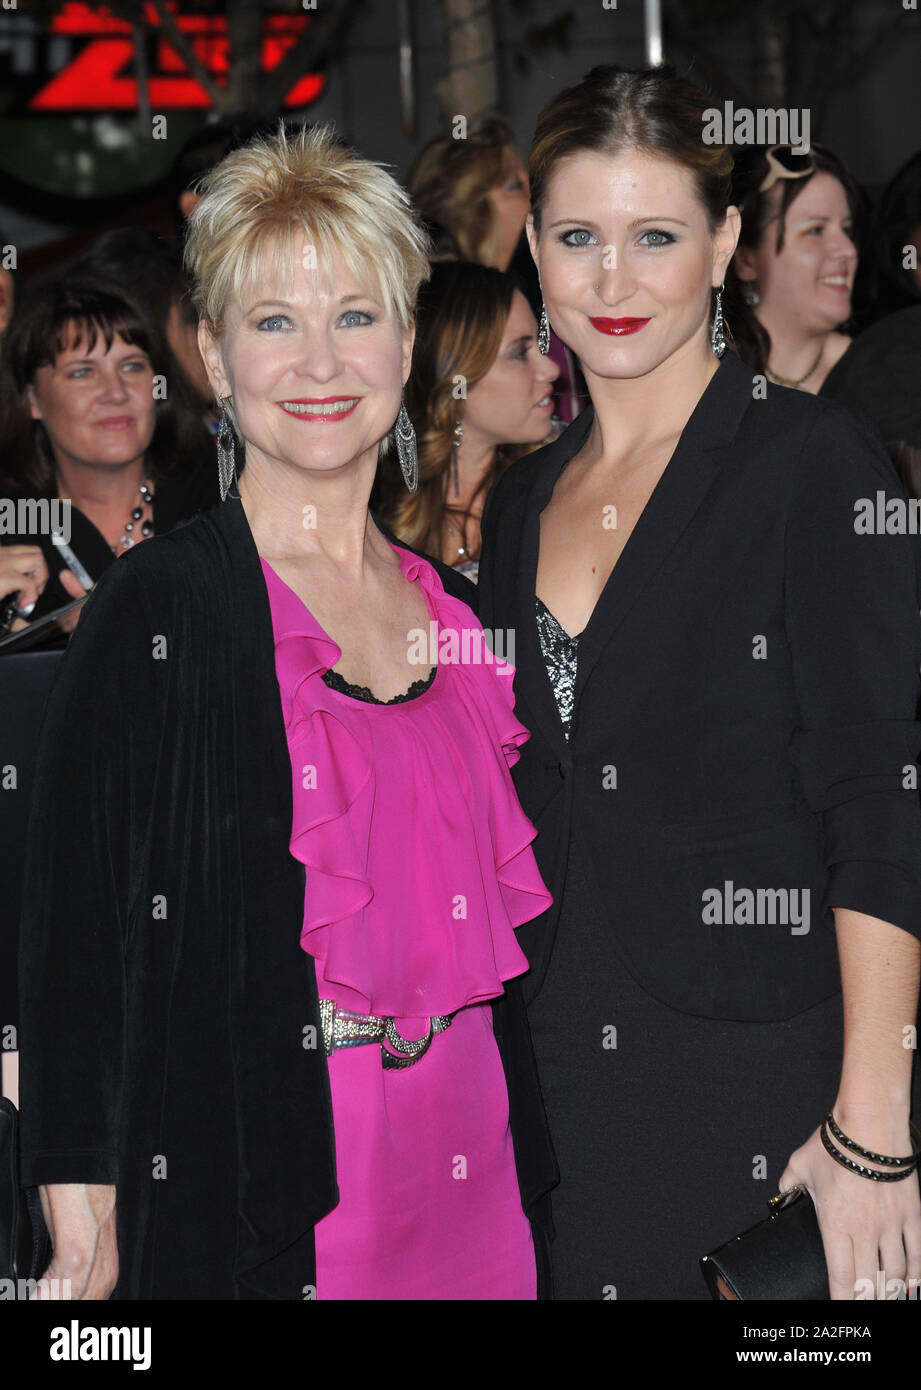 LOS ANGELES, CA. November 14, 2011: Dee Wallace & Gabrielle Stone (right) at the world premiere of 'The Twilight Saga: Breaking Dawn - Part 1' at the Nokia Theatre, L.A. Live in downtown Los Angeles. © 2011 Paul Smith / Featureflash Stock Photo